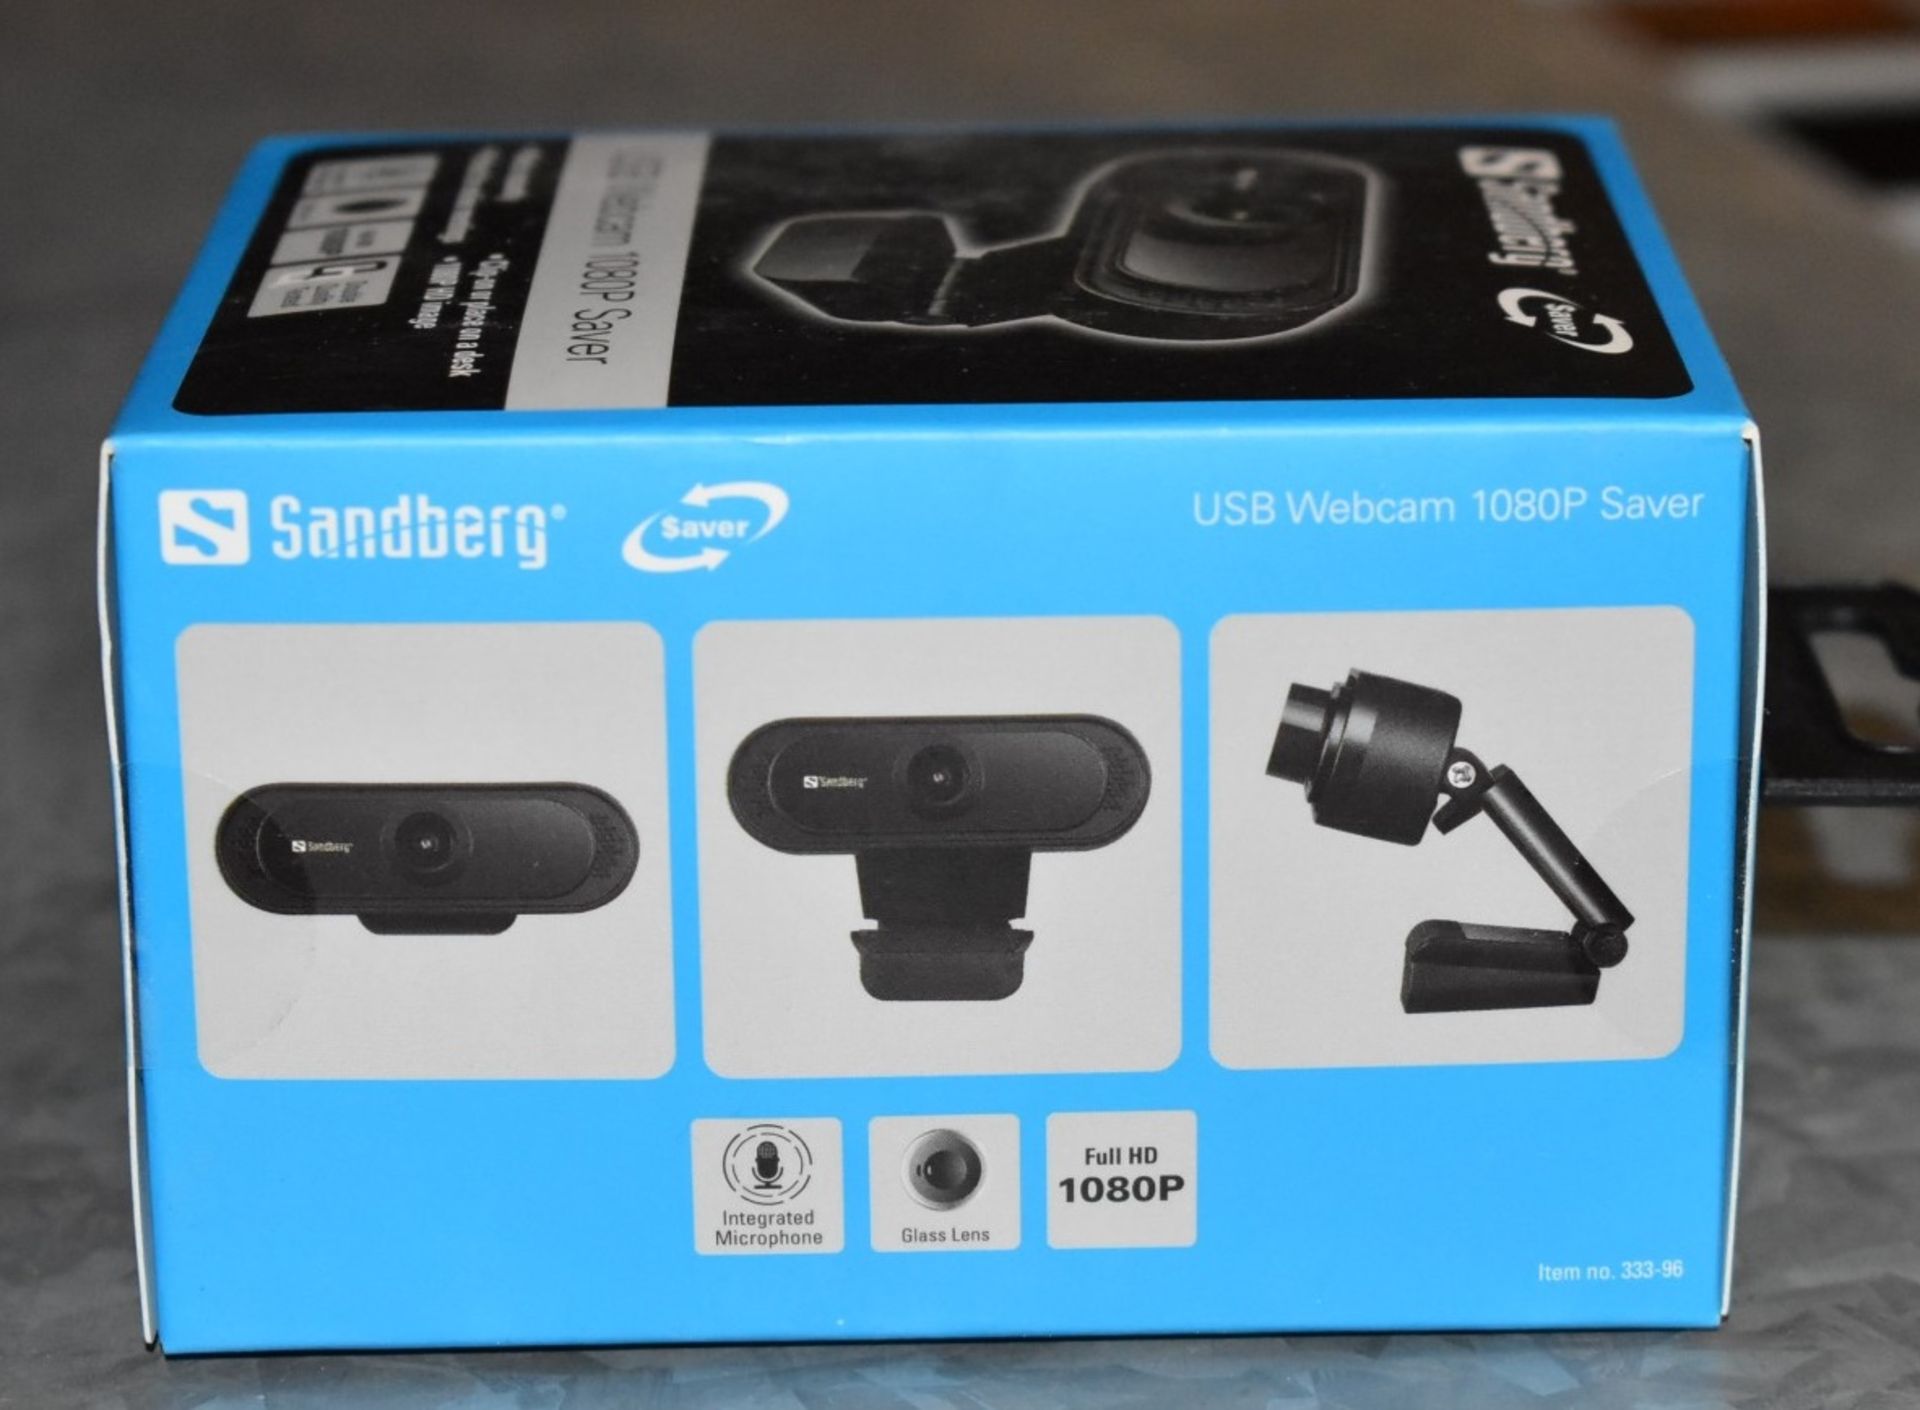 1 x Sandberg USB Full HD 1080p Webcam With Microphone - RRP £34.99 - New Boxed Stock - Image 3 of 3